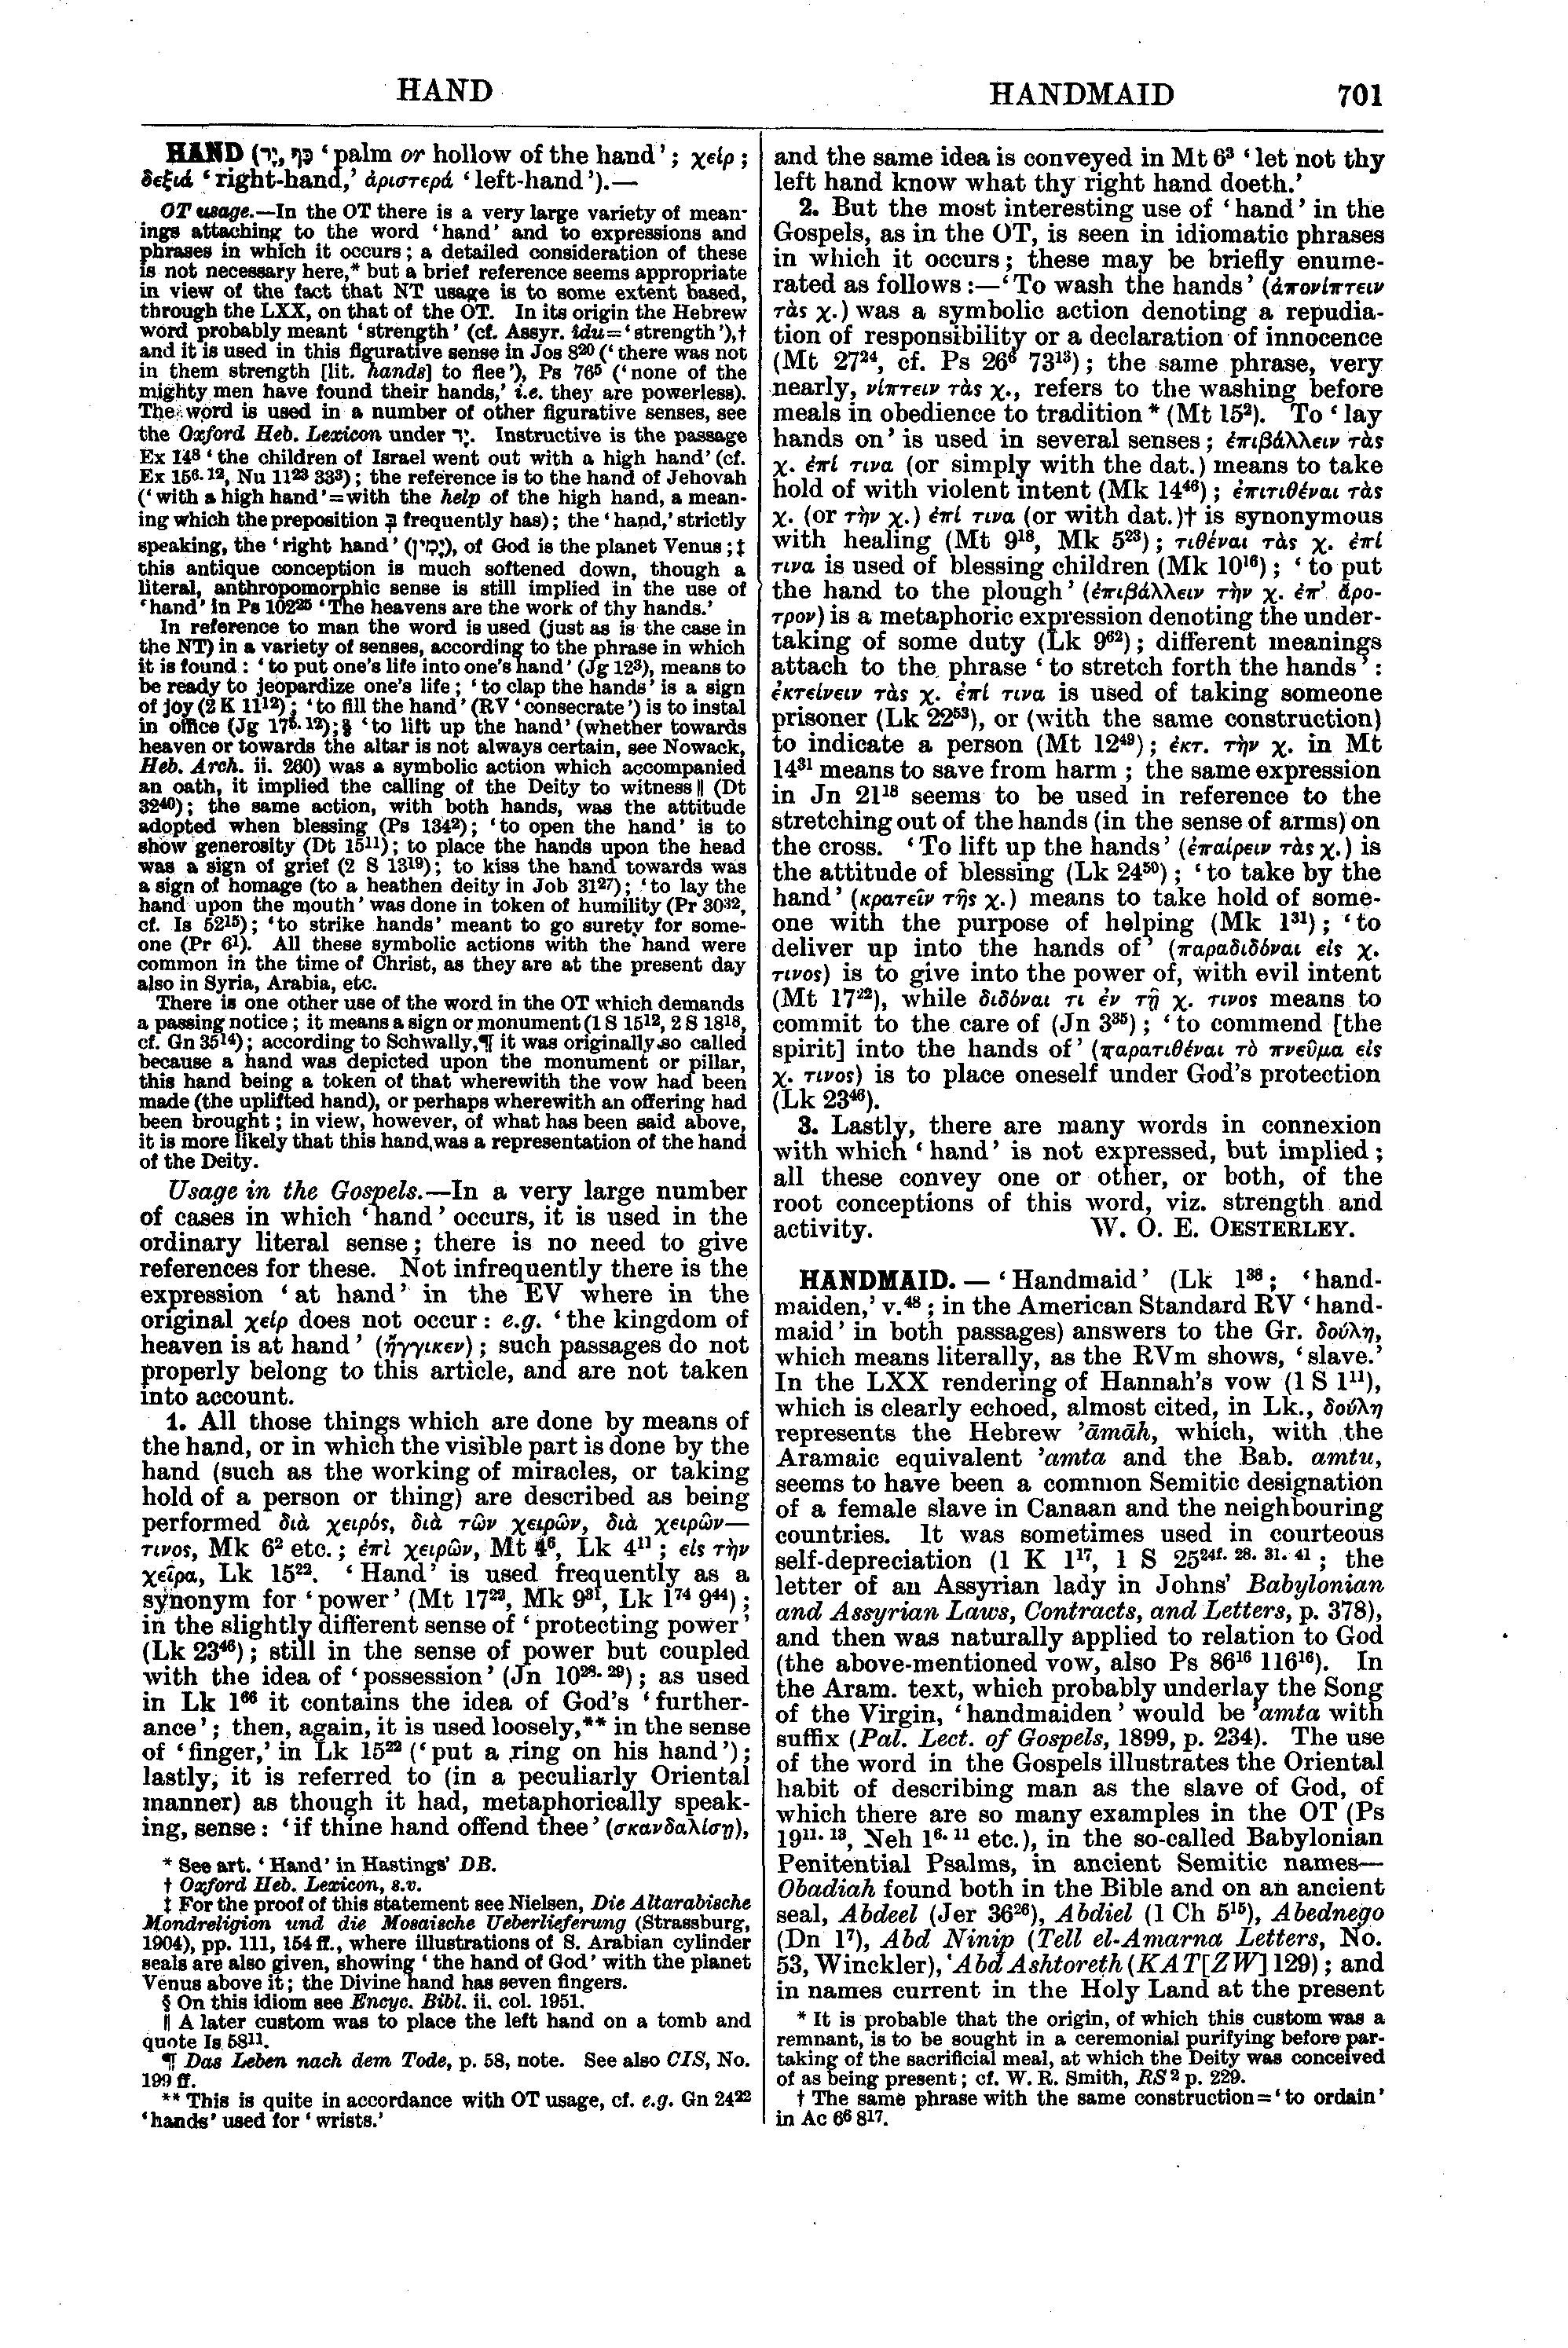 Image of page 701